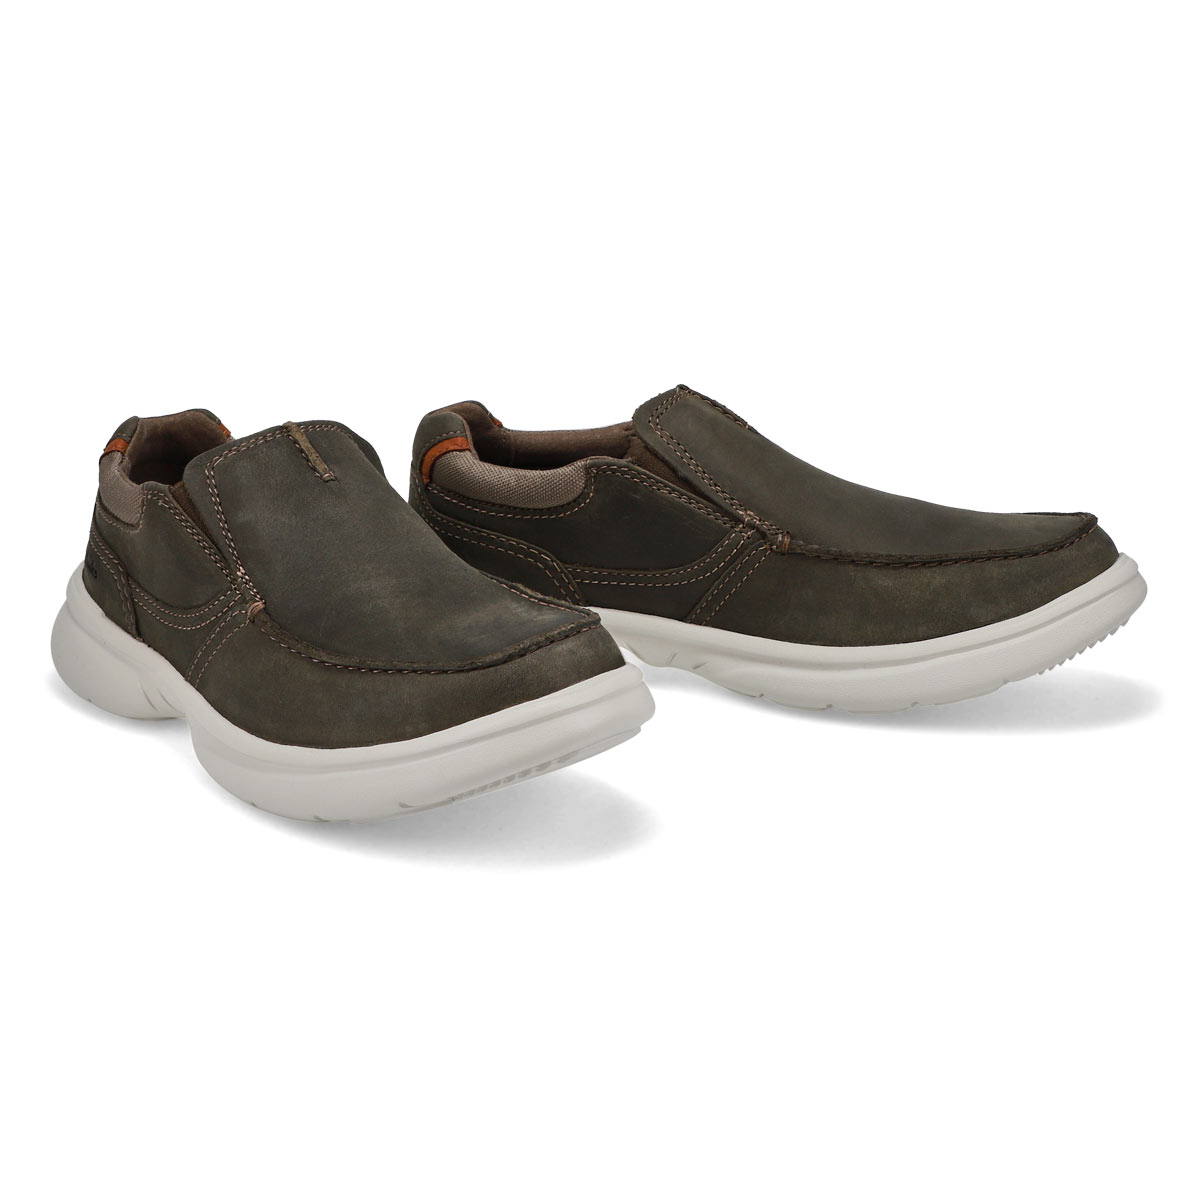 Clarks Men's Bradley Free Casual Wide Loafer | SoftMoc.com